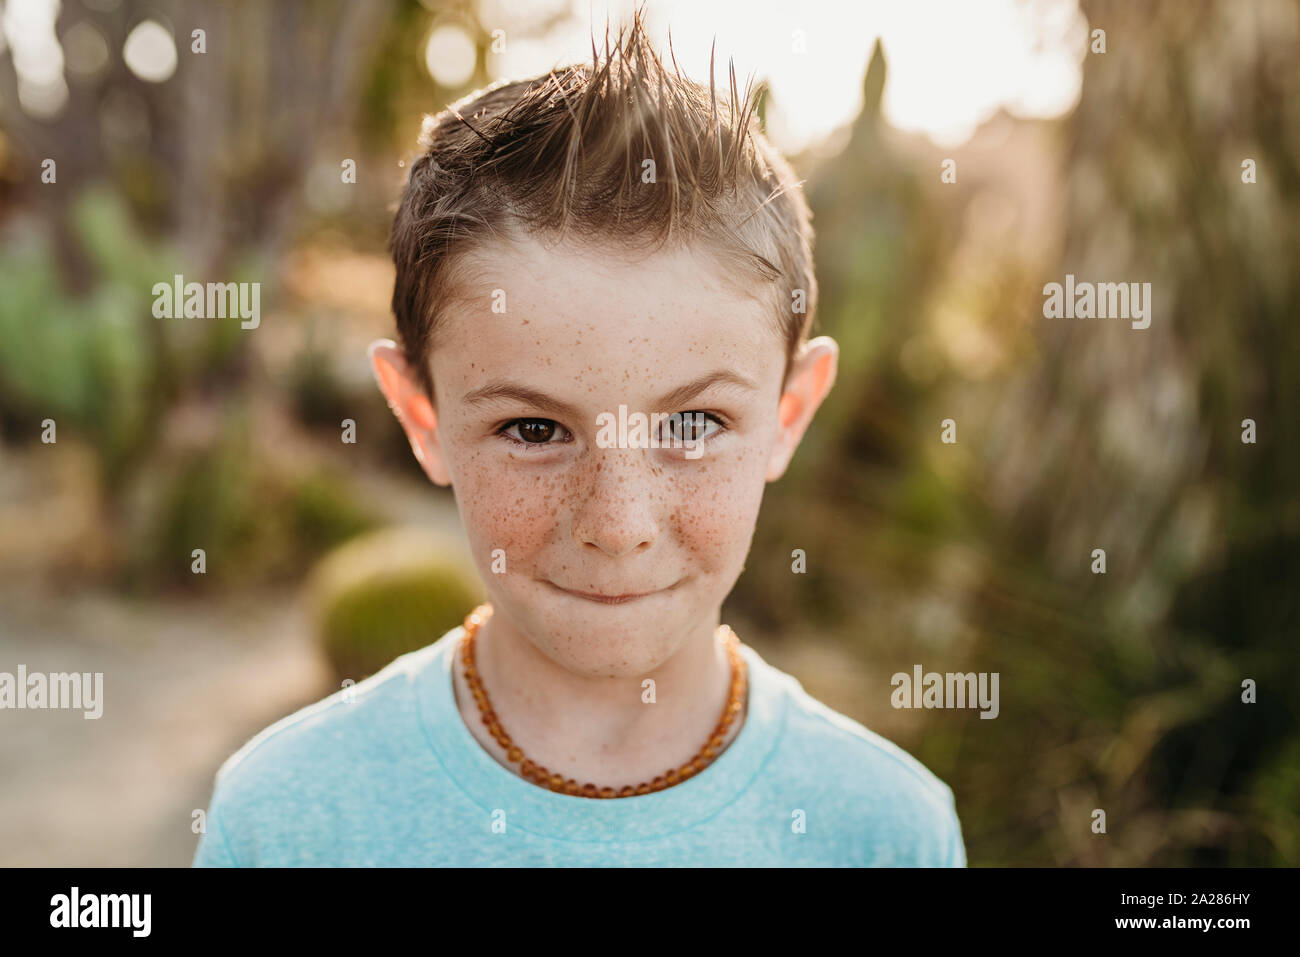 Close up portrait of cute young boy with freckles making serious face Stock Photo